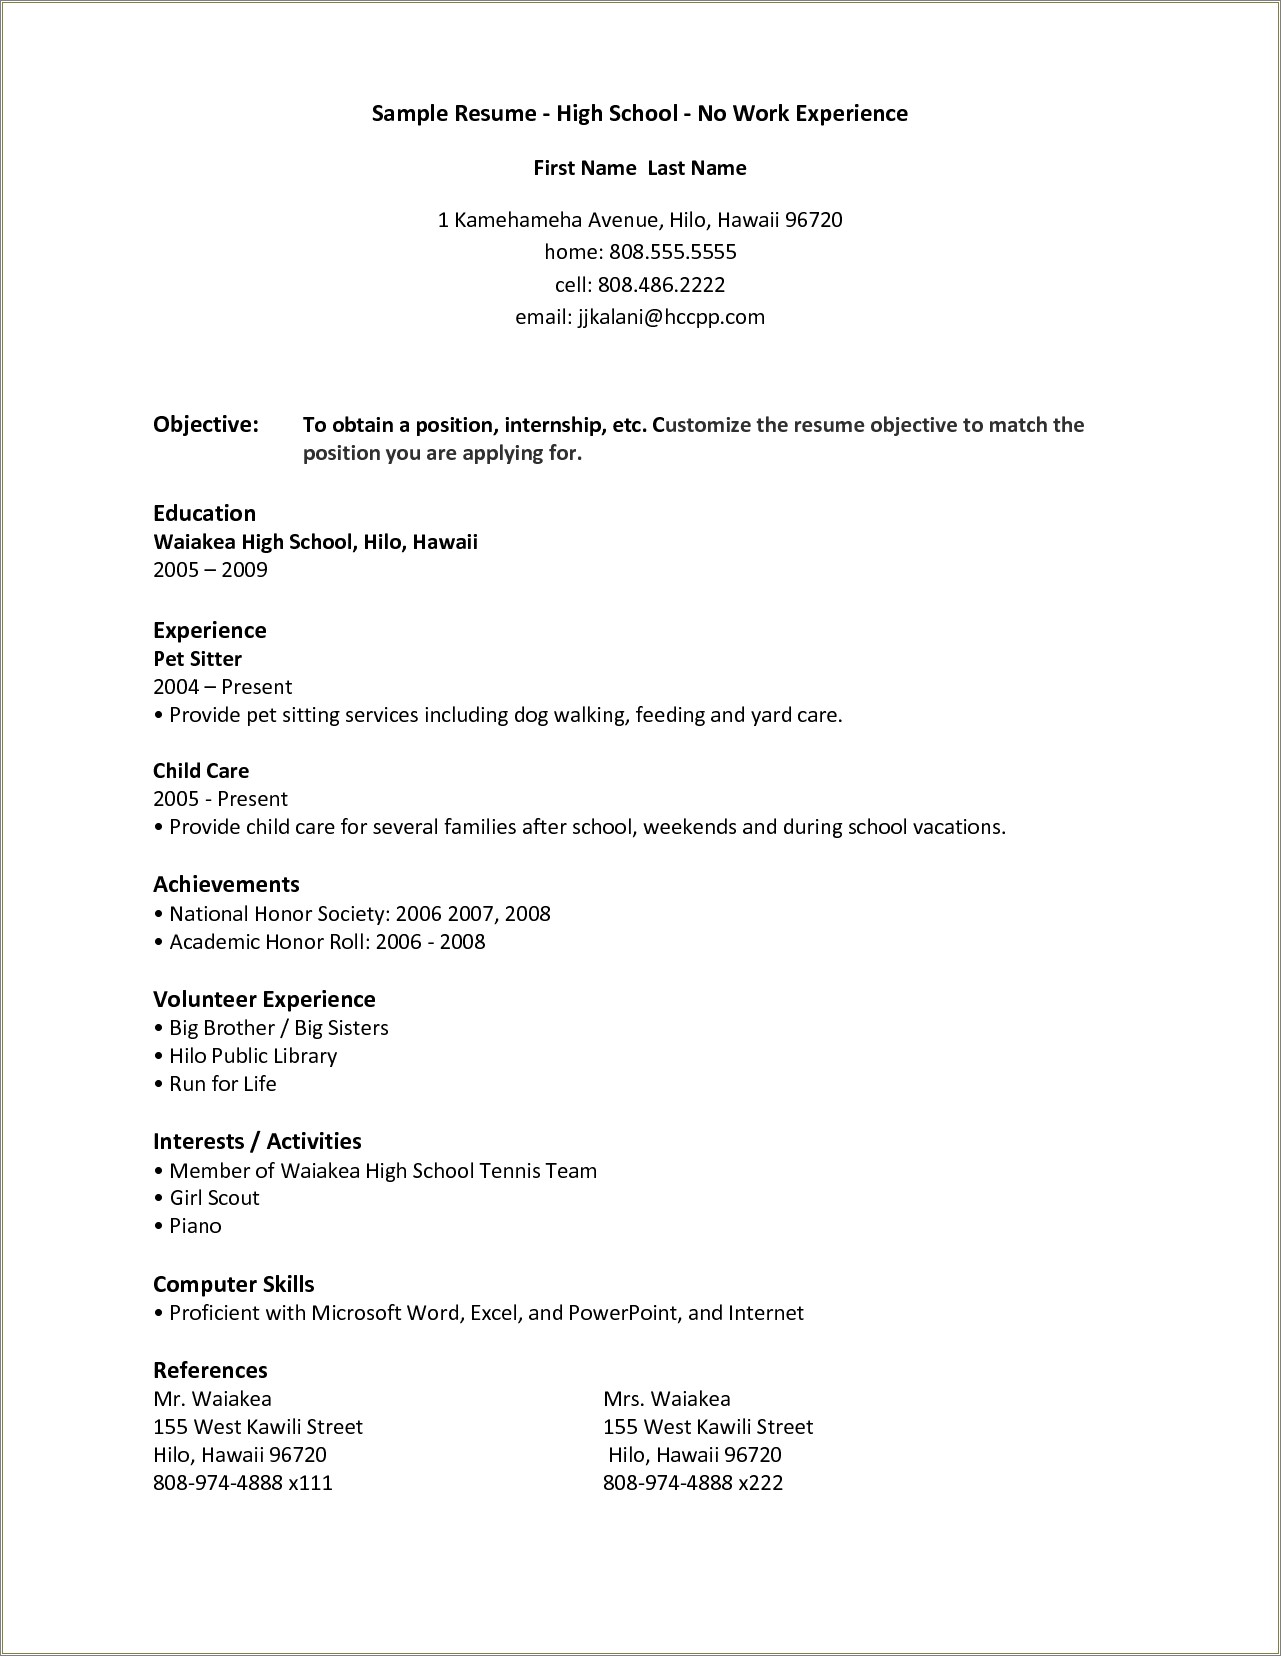 Experience Education And Skills Resume Template Simple Basic